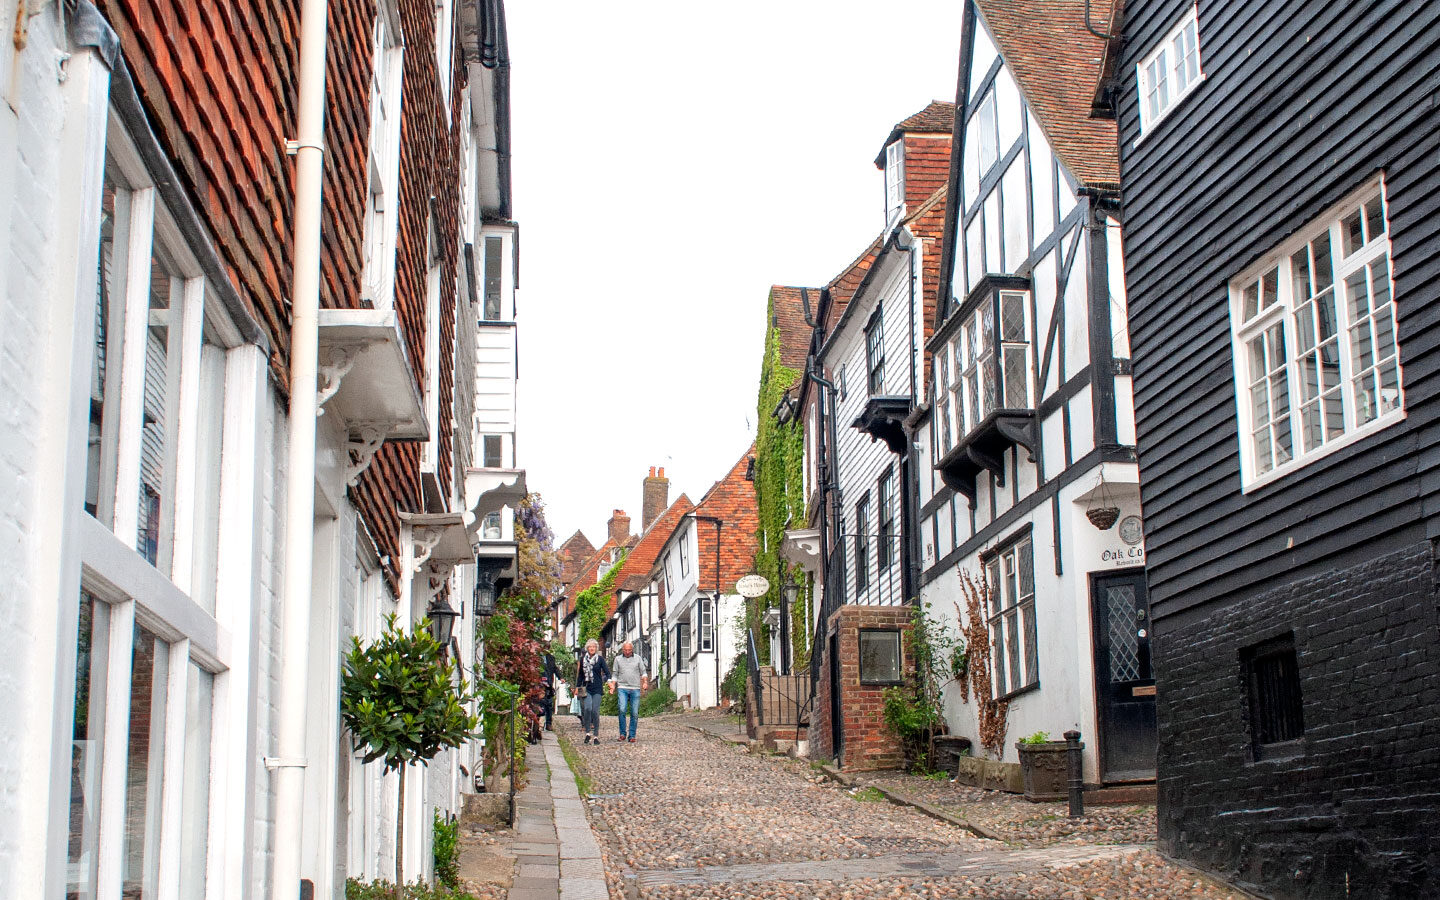 Cobbled streets in Rye